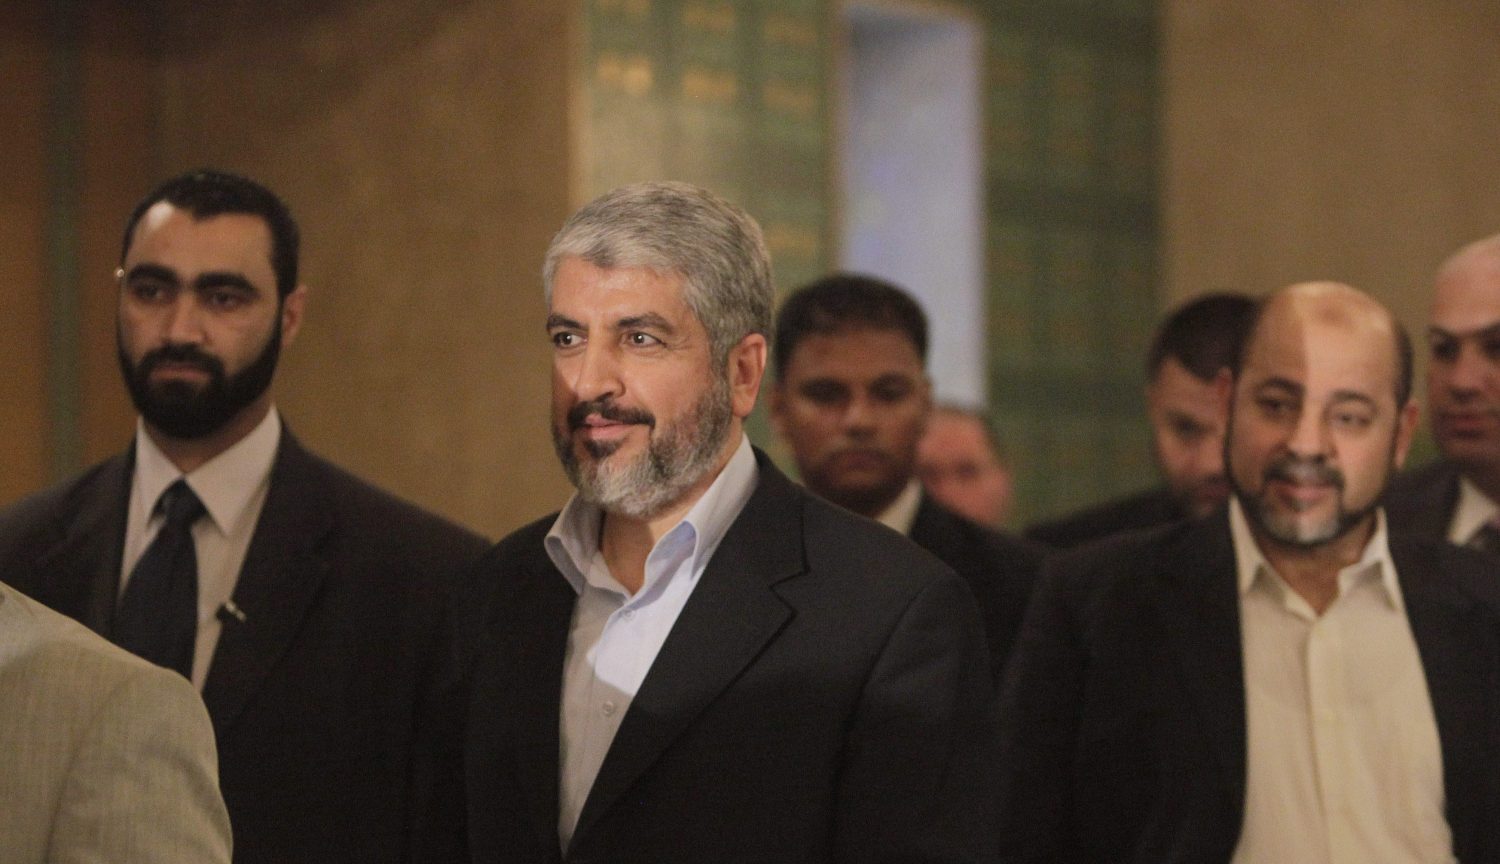 Hamas leader Khaled Mashaal (C) walks with Mousa Abu Marzook (R), senior member of Hamas before giving speaking at a news conference at the Arab League headquarters in Cairo, May 3, 2011. REUTERS/Asmaa Waguih (EGYPT - Tags: POLITICS) - RTR2LYH9